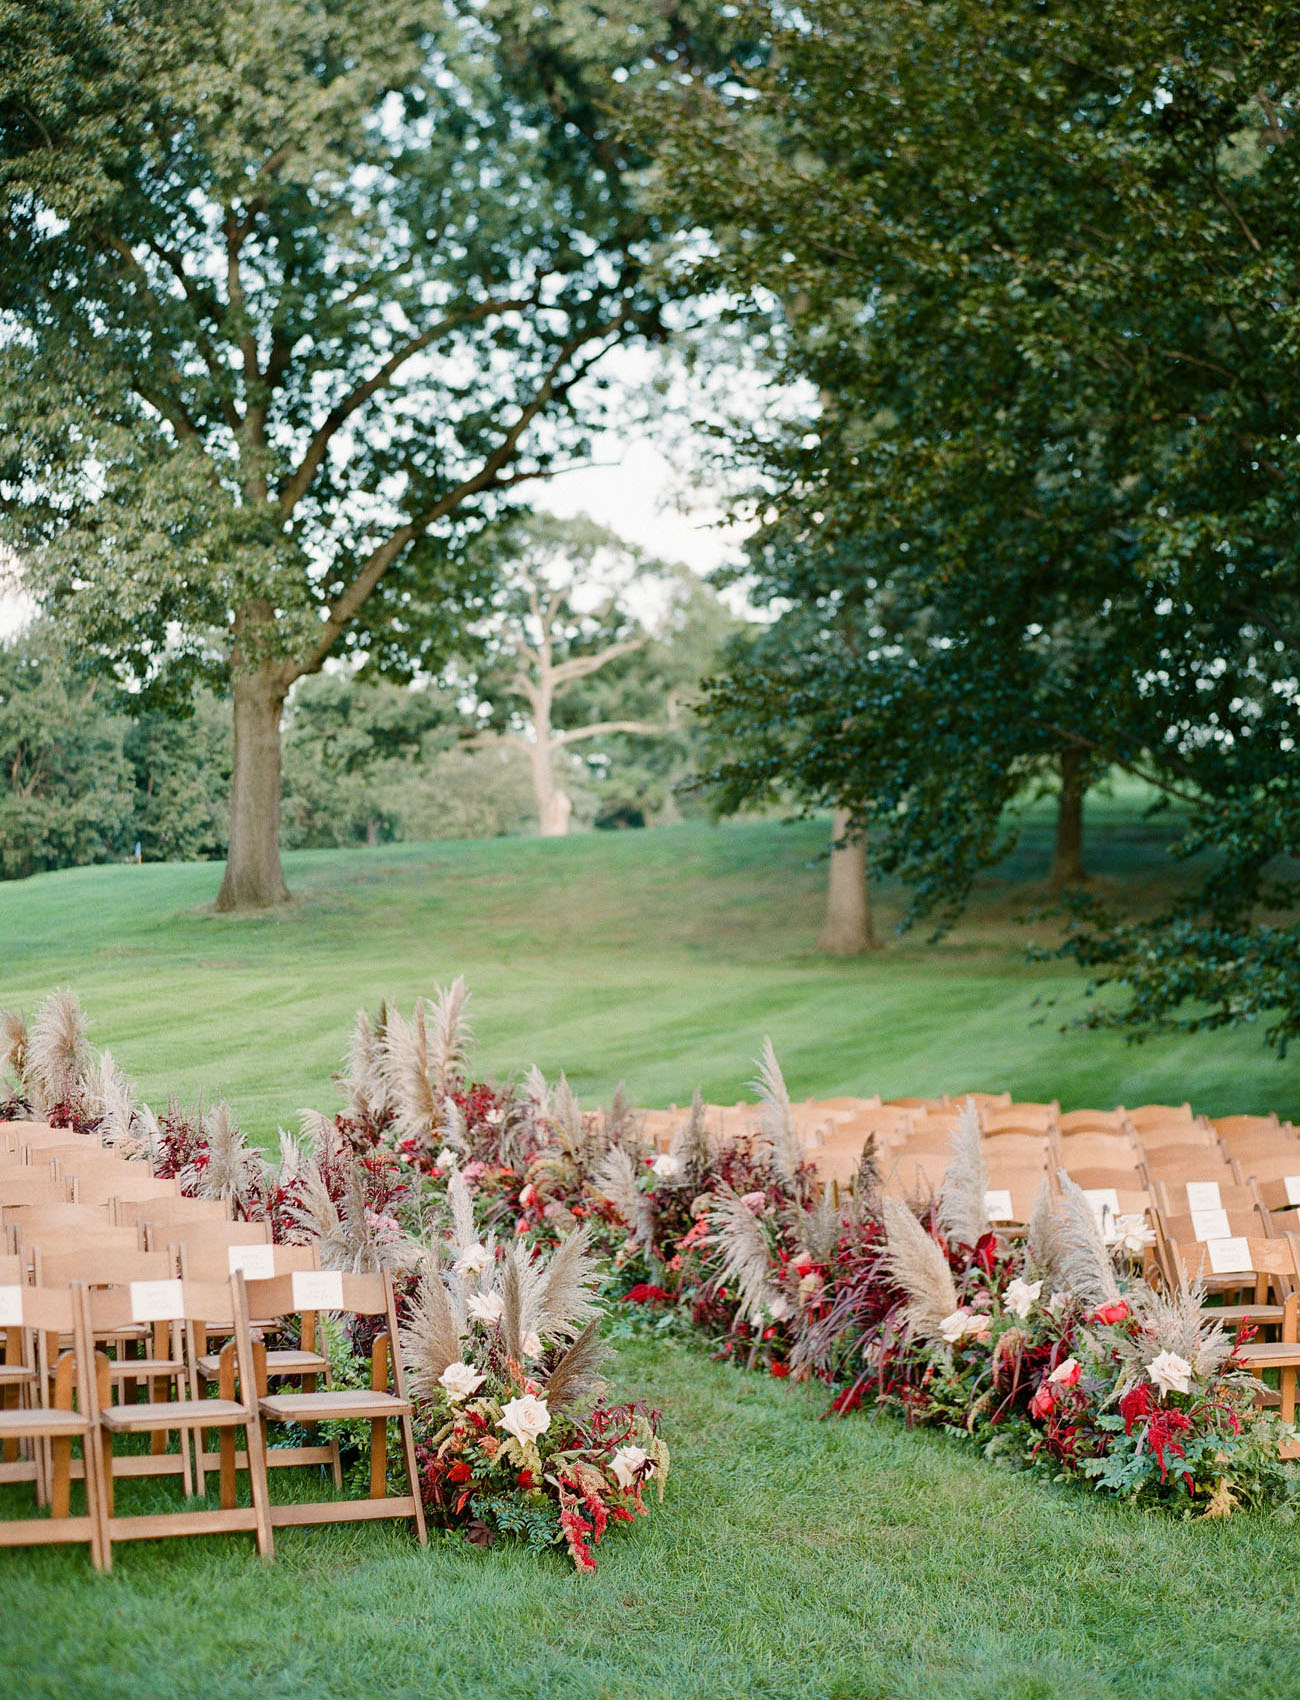 Garden wedding ceremony with wood chairs and pampas grass and red flowers aisle decor